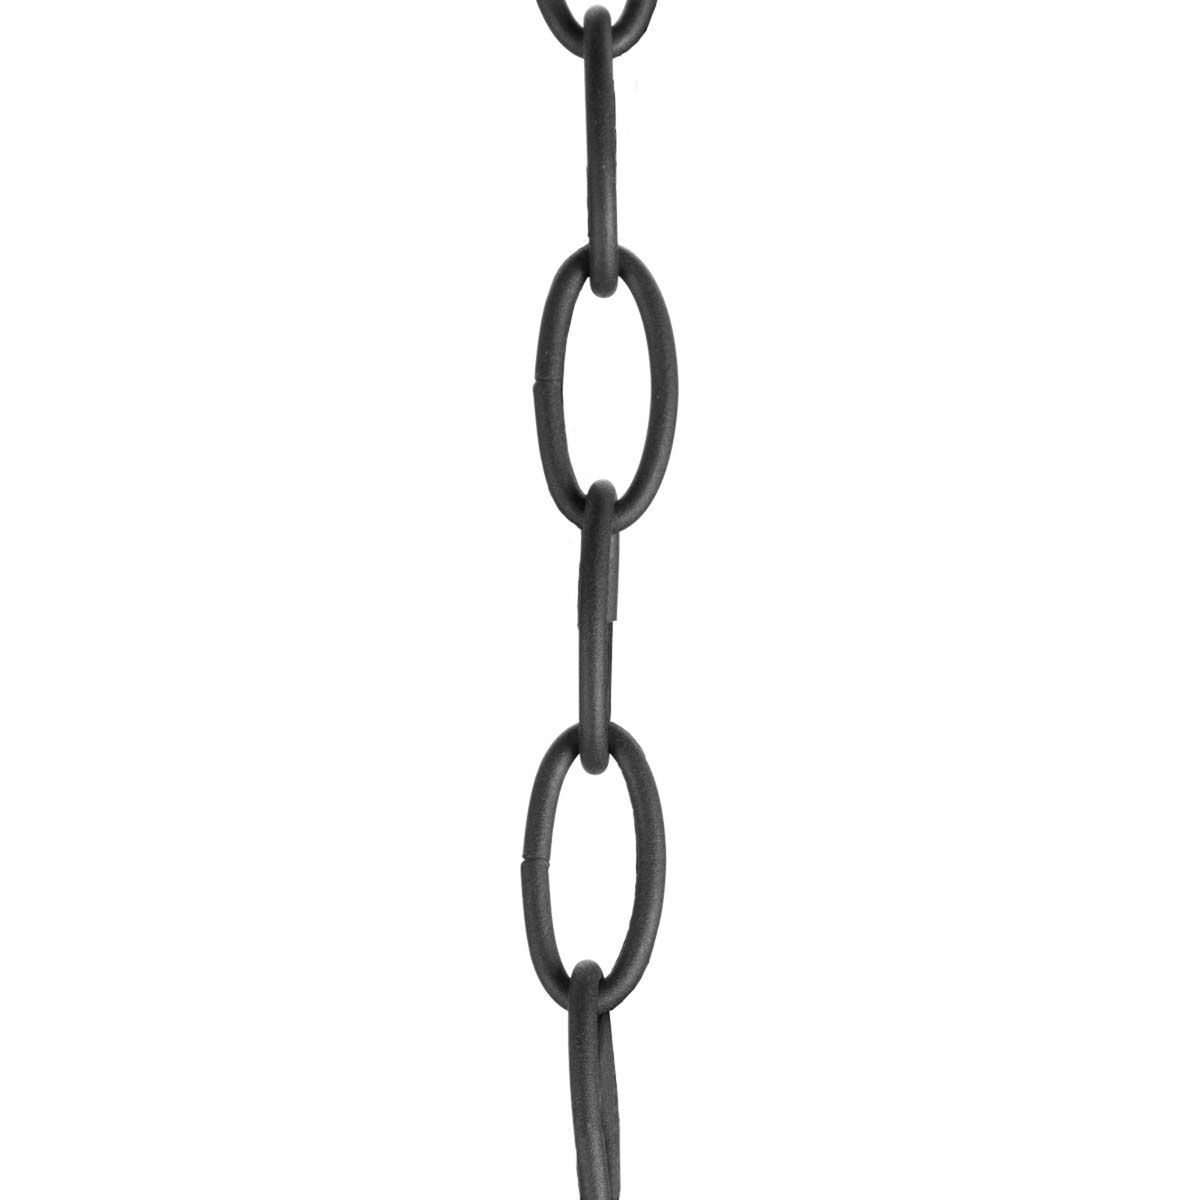 Ten feet of 9 gauge chain in Graphite finish. Solid chain permits installation of chain-hung fixtures on high ceilings. Maximum fixture weight 50 lbs.